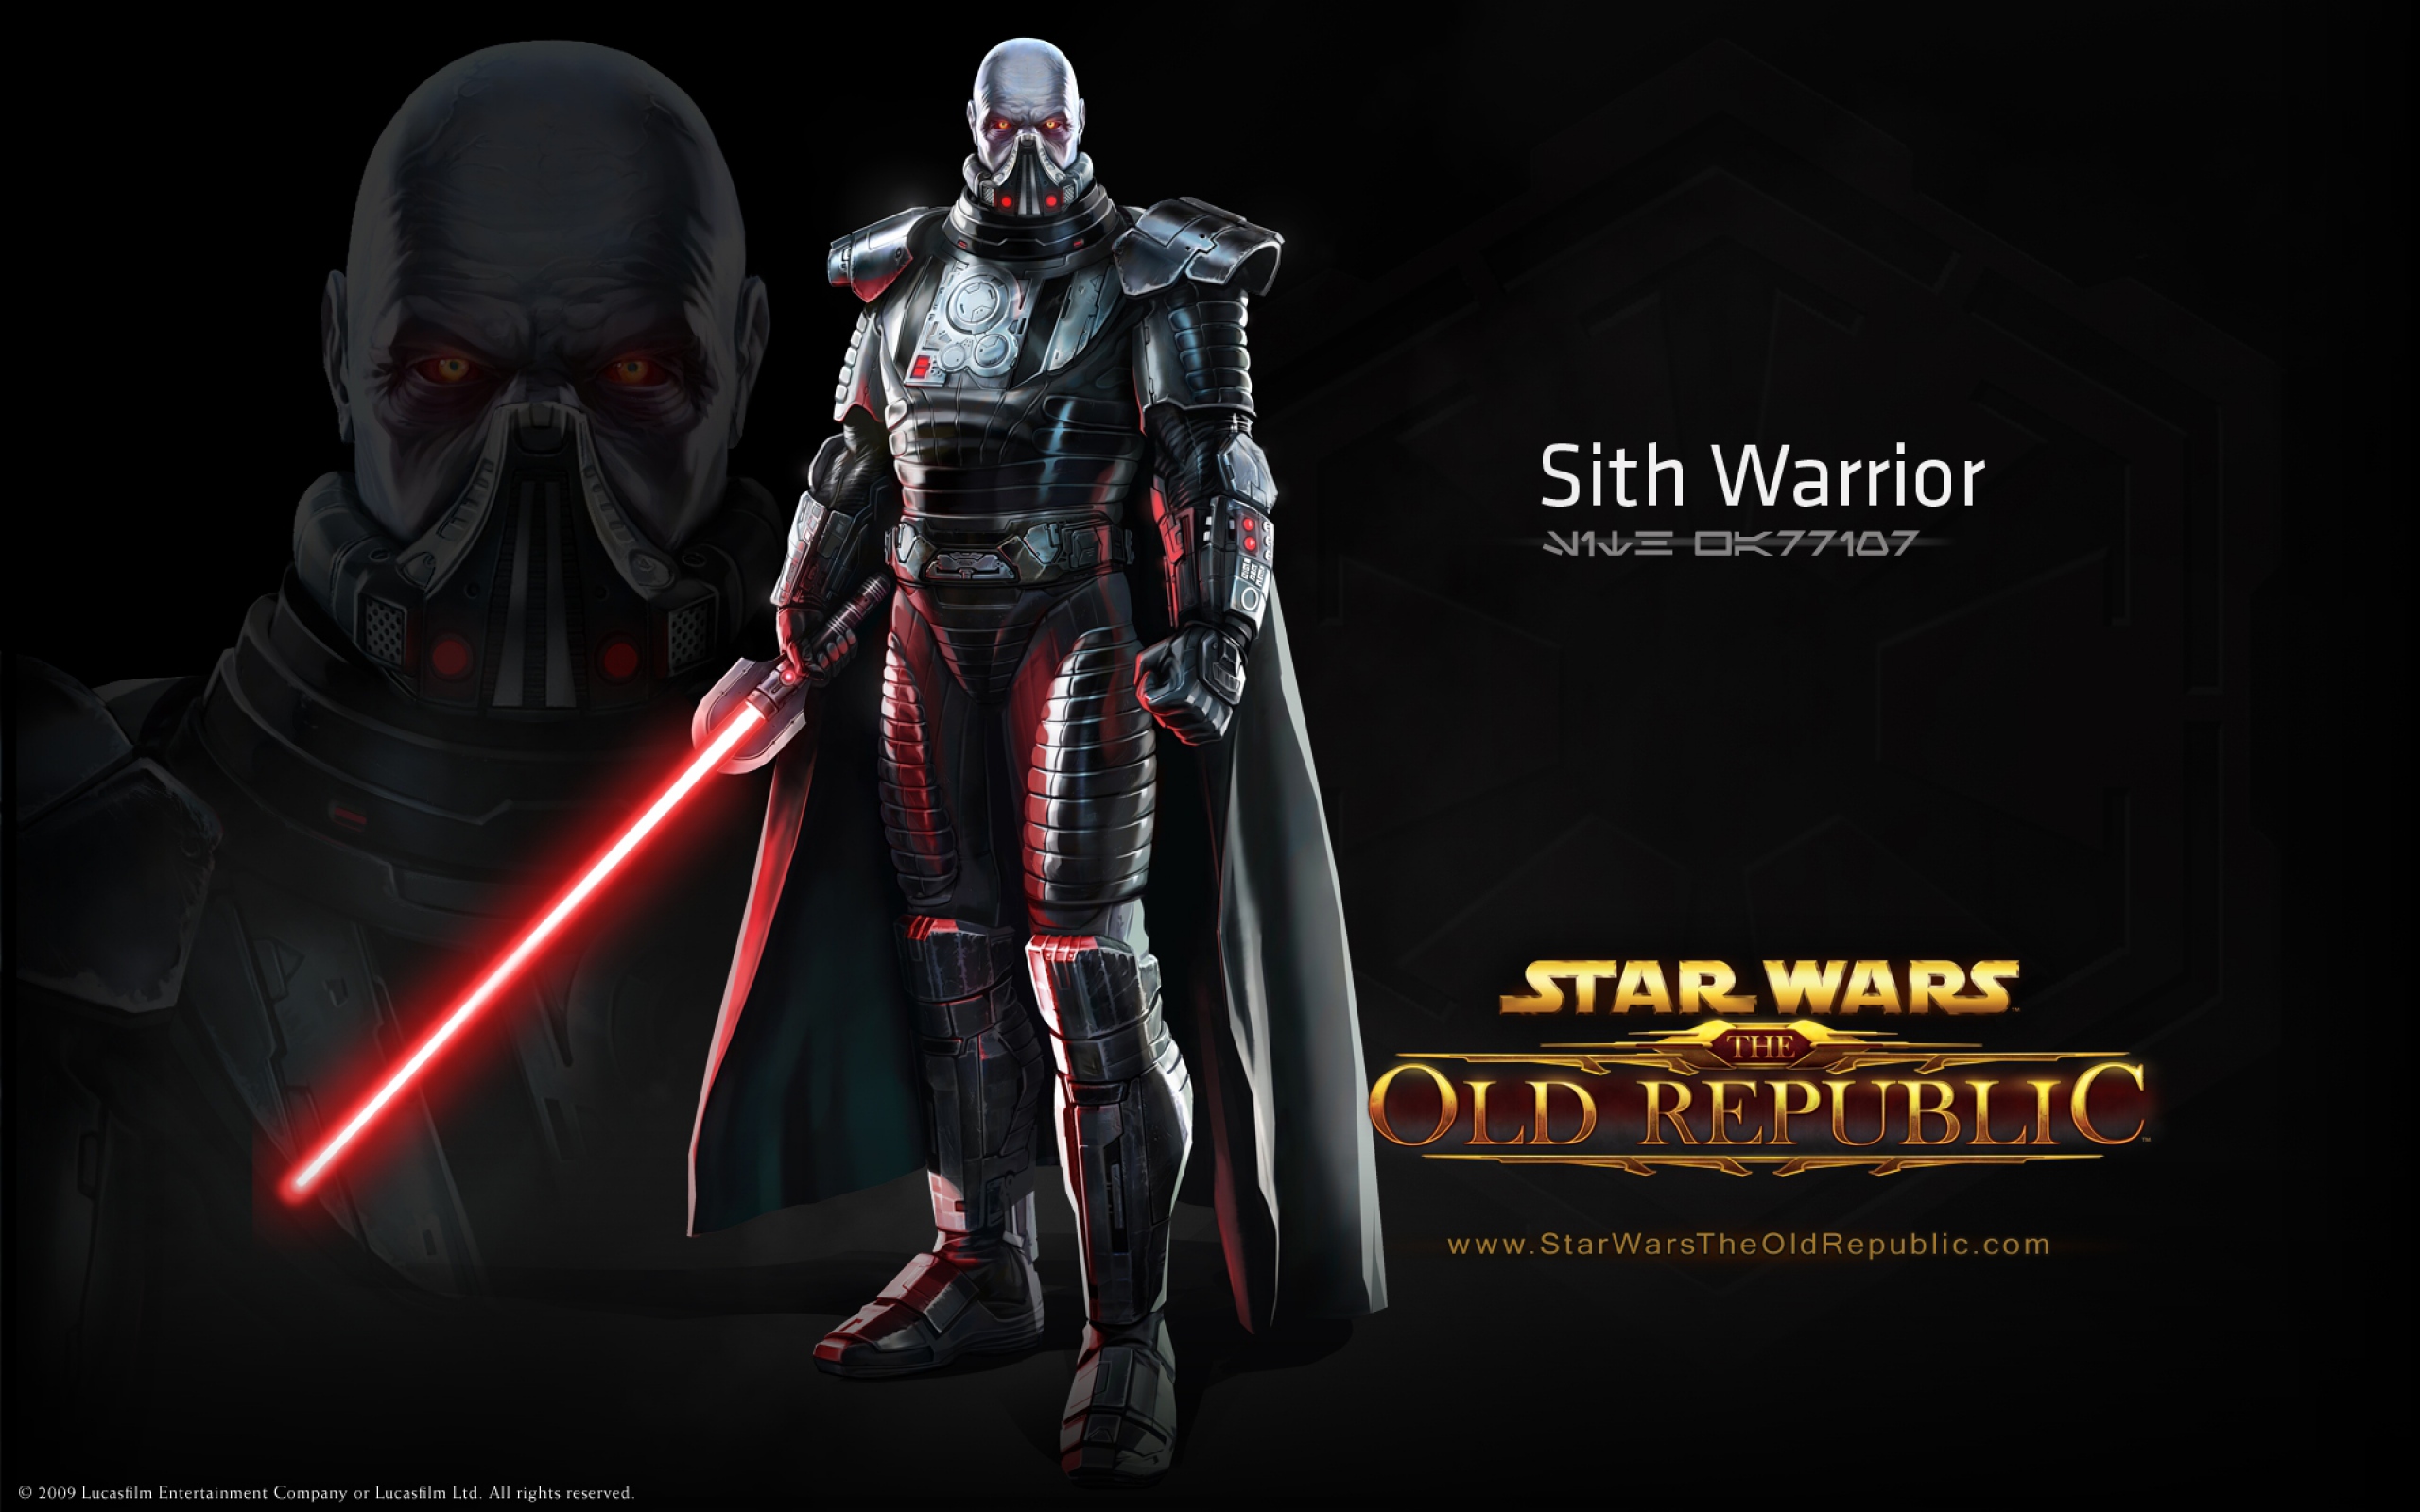 Star Wars The Old Republic Wallpapers, Pictures, Images